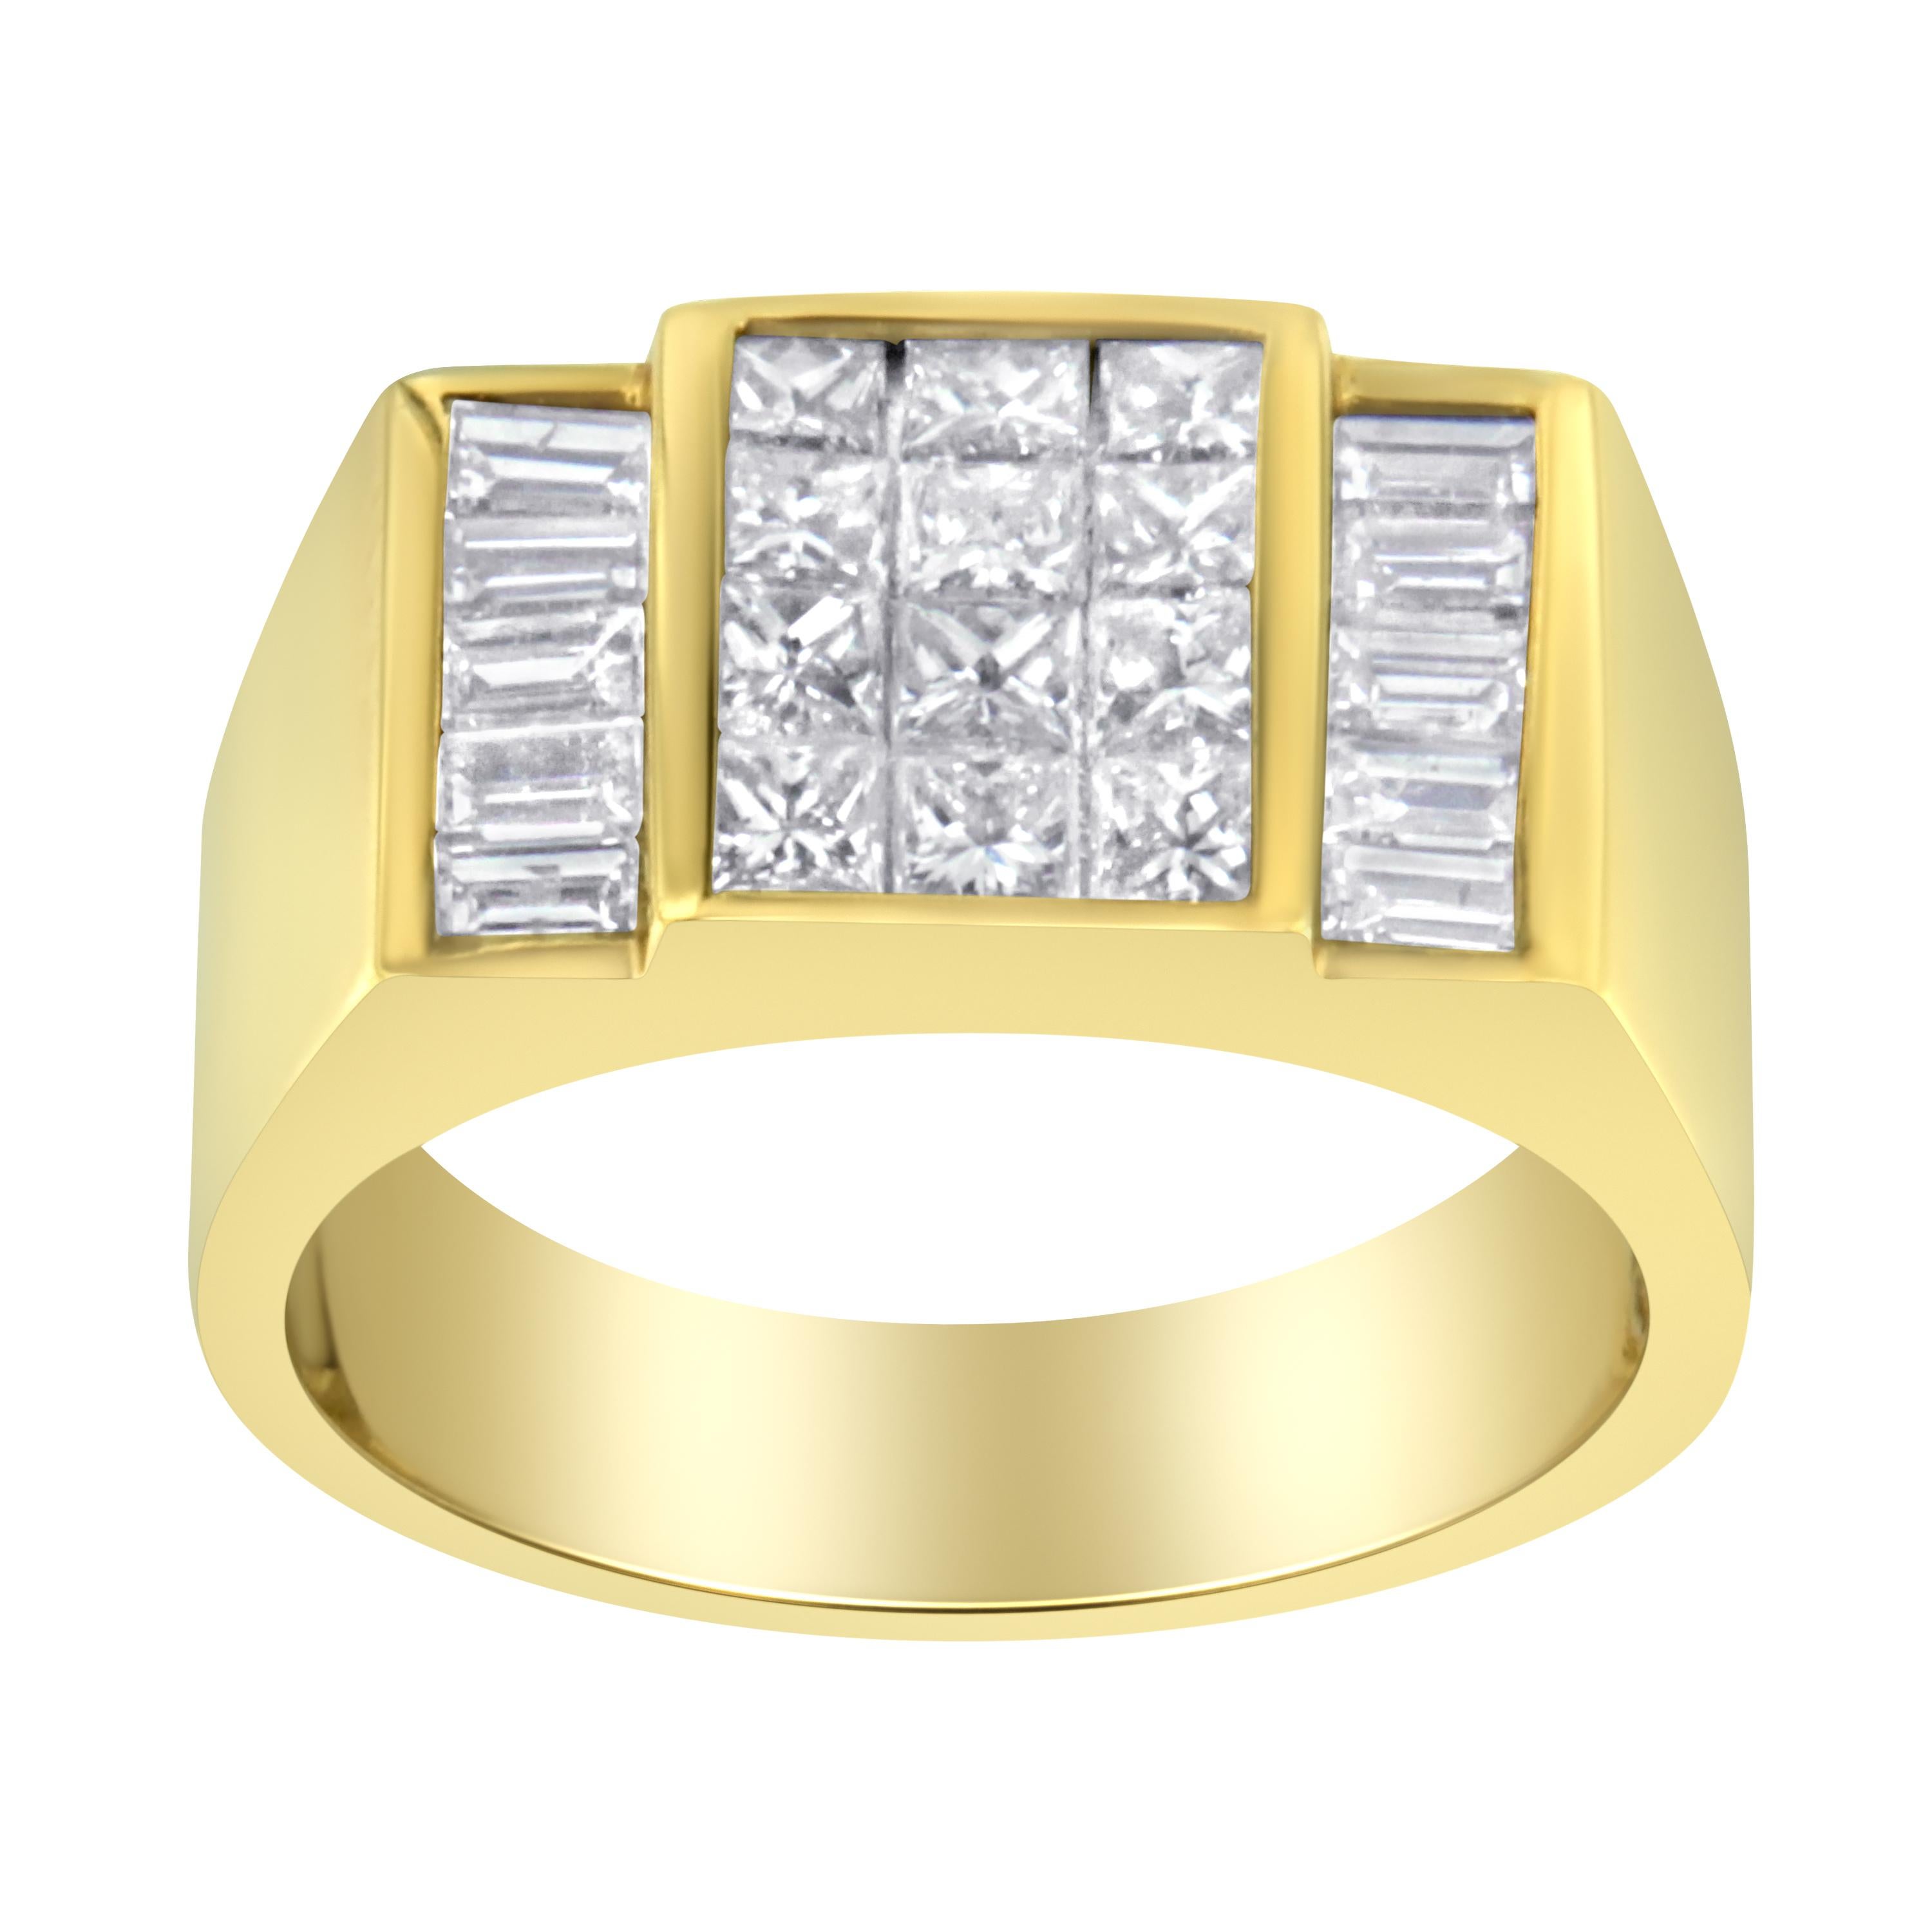 Honor your promises and present him this lovely yet stunning diamond ring. Representing an elegant and solid design in a cluster pattern, the ring is composed of luster 14 karats yellow gold. It is beautifully adorned with sparkling princess cut